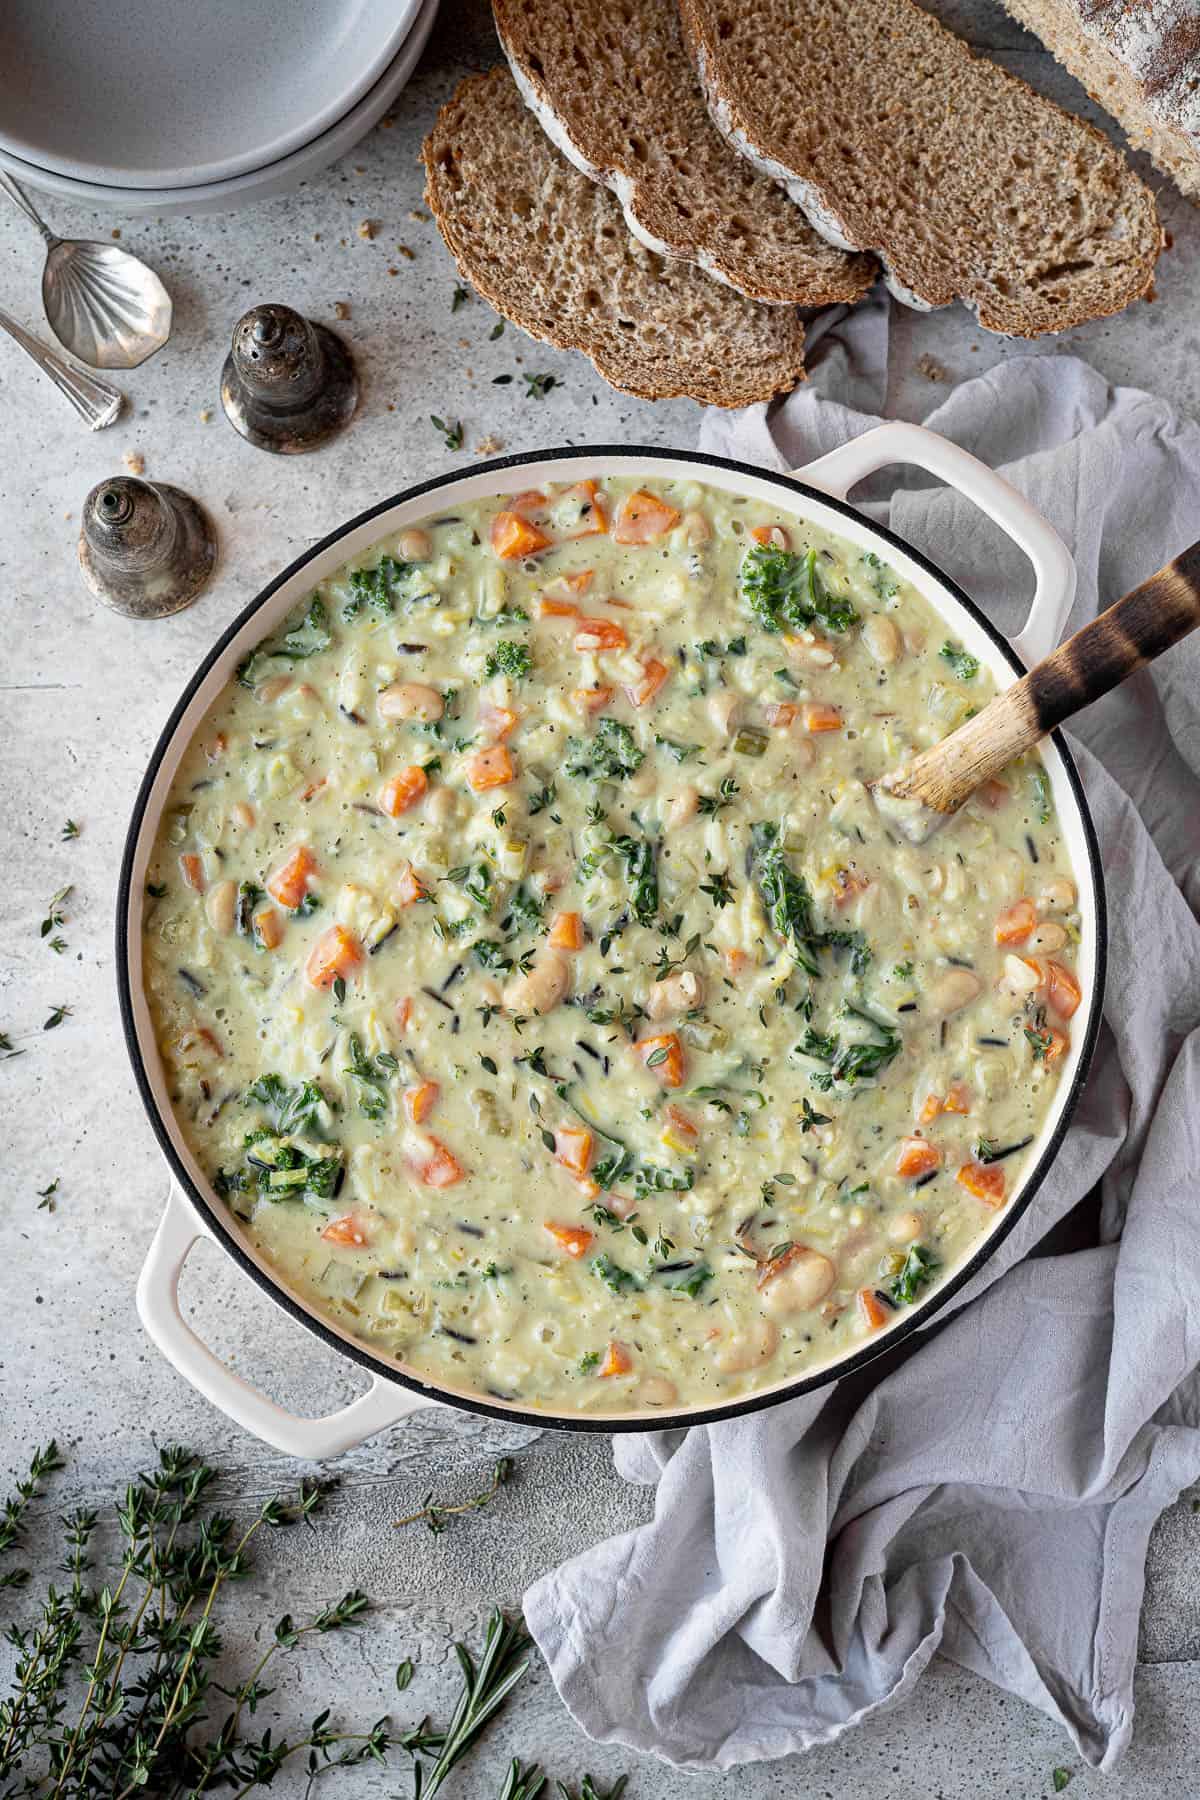 A pan of creamy vegetable rice soup with slices of bread, fresh herbs, soup bowls and salt and pepper shakers.